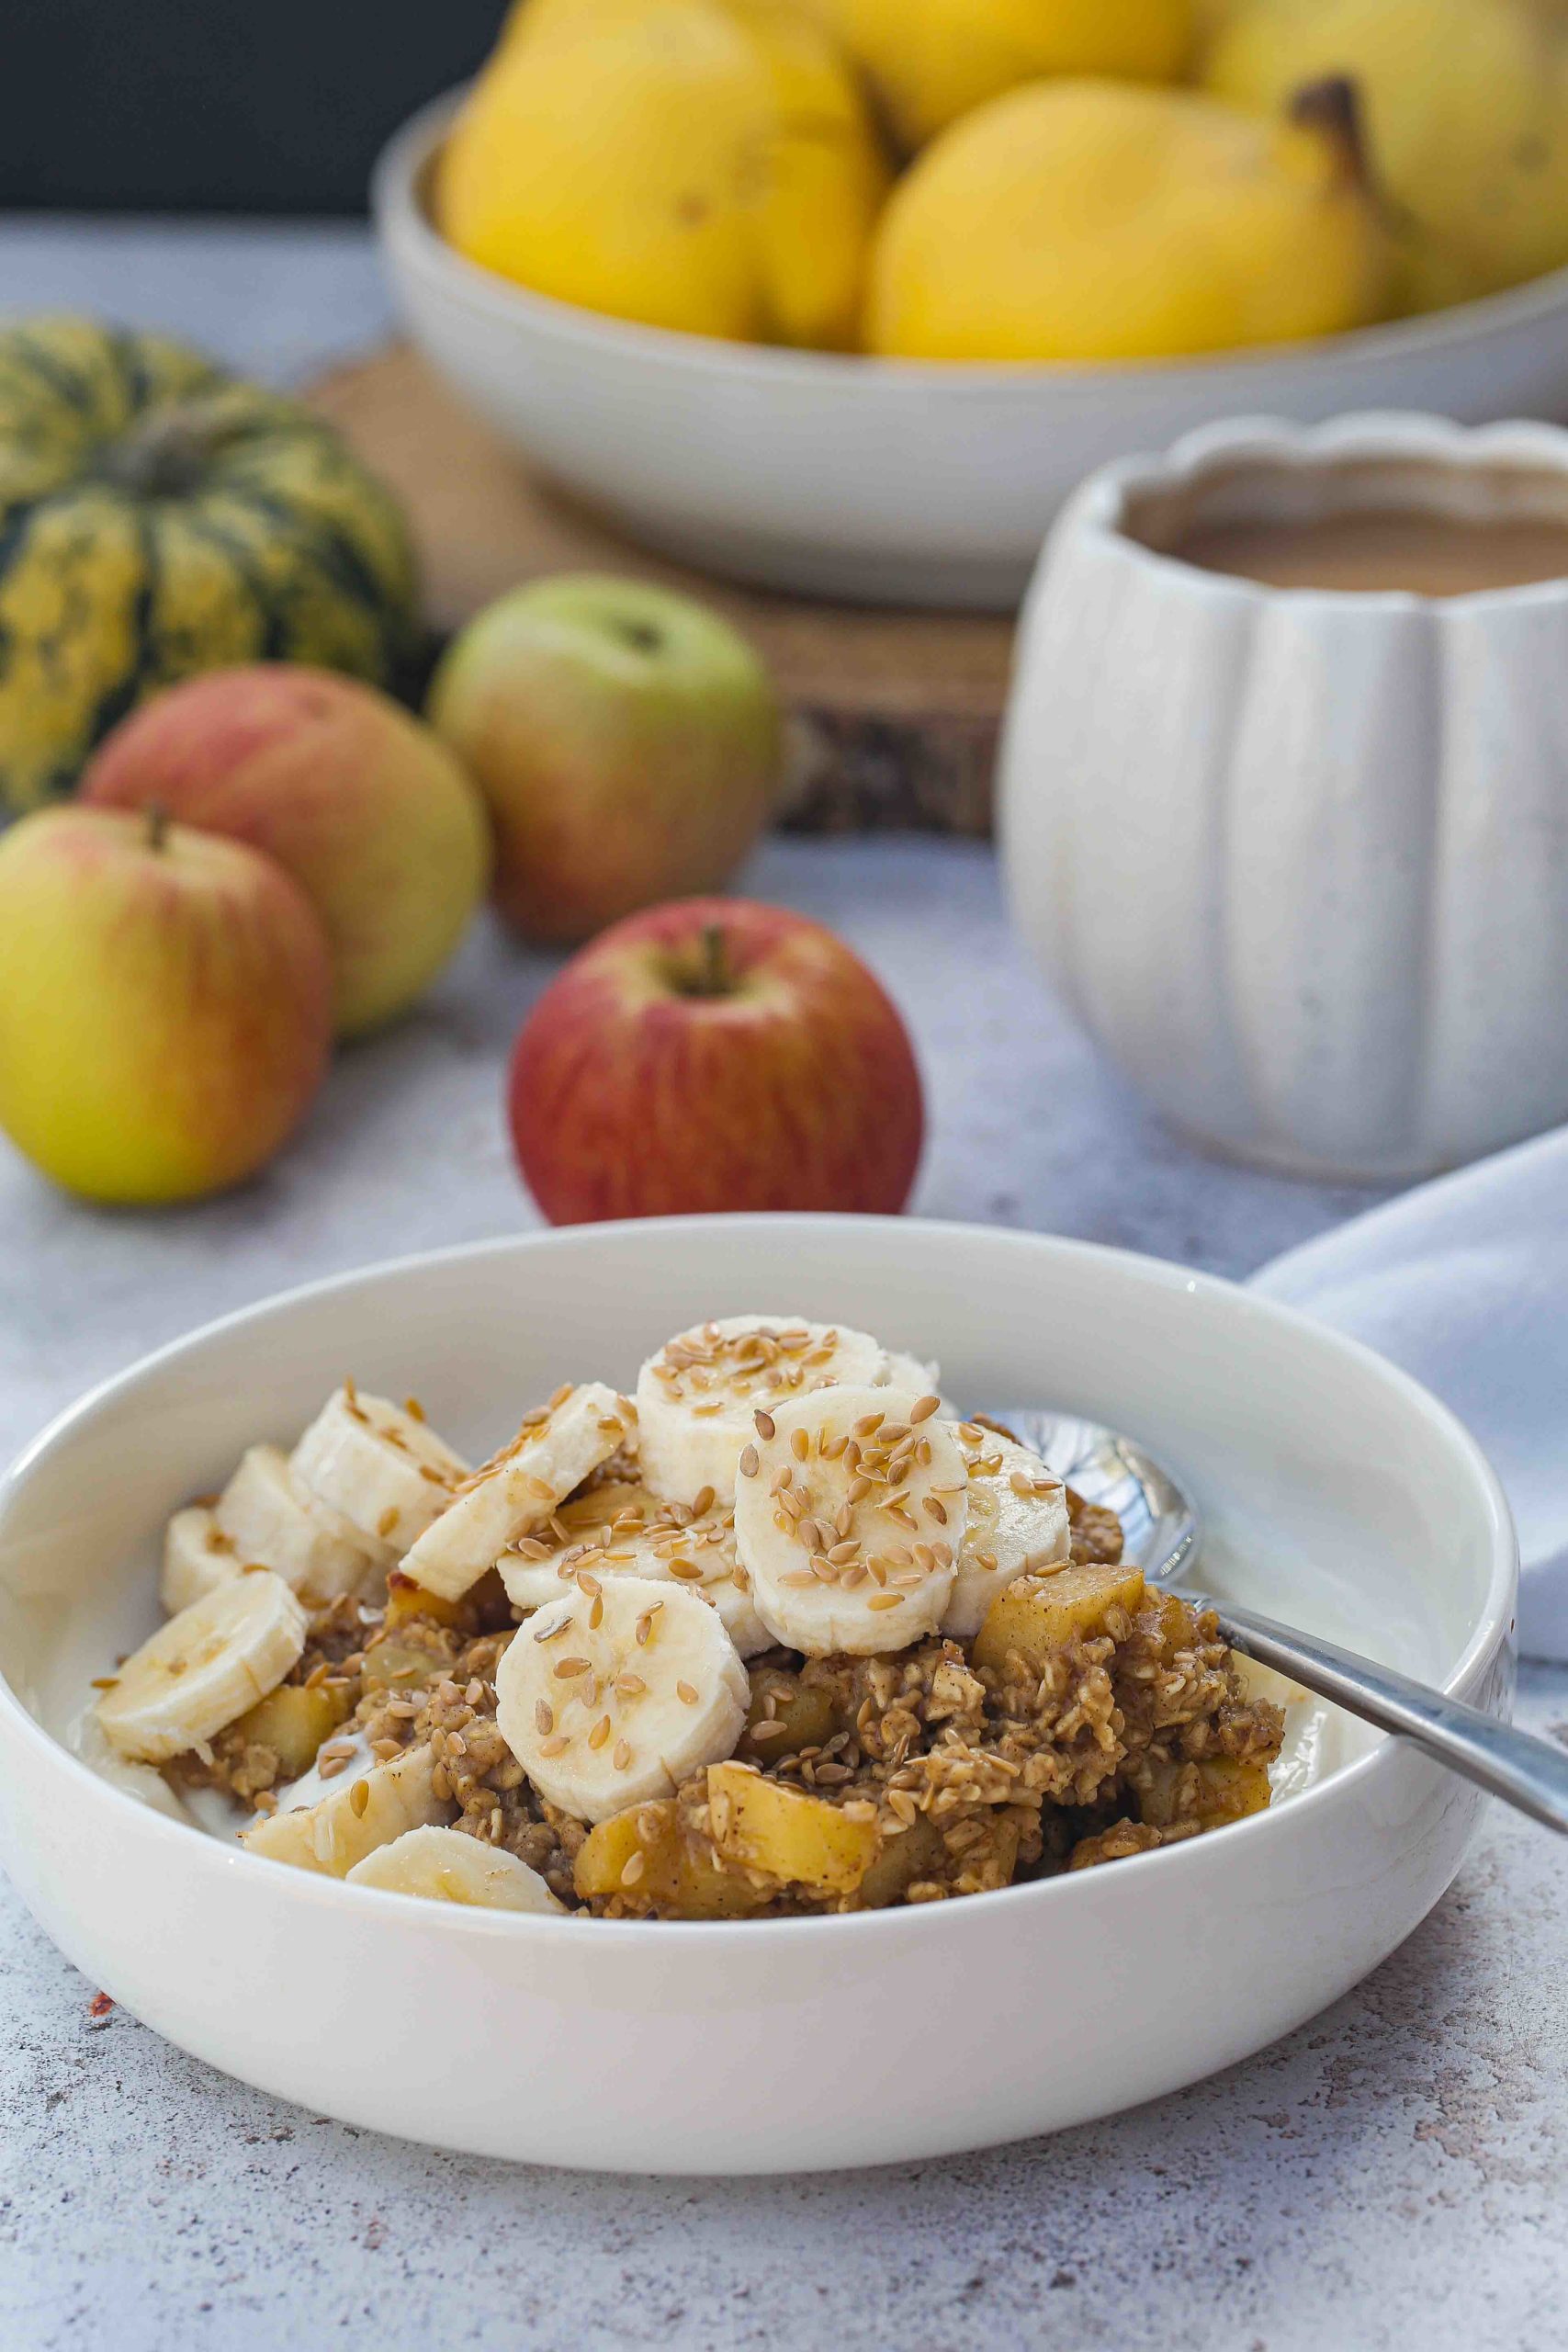 Enjoy dessert for breakfast with these creamy, warming apple crumble oats all cooked in one pan! Juicy apples and spices combine with oats and vegan yoghurt for a really hearty and easy breakfast | Recipe on thecookandhim.com #veganrecipes #veganbreakfast #oatmeal #oatbreakfastrecipes #applerecipes #easybreakfastrecipes #thecookandhim #fruitbreakfast